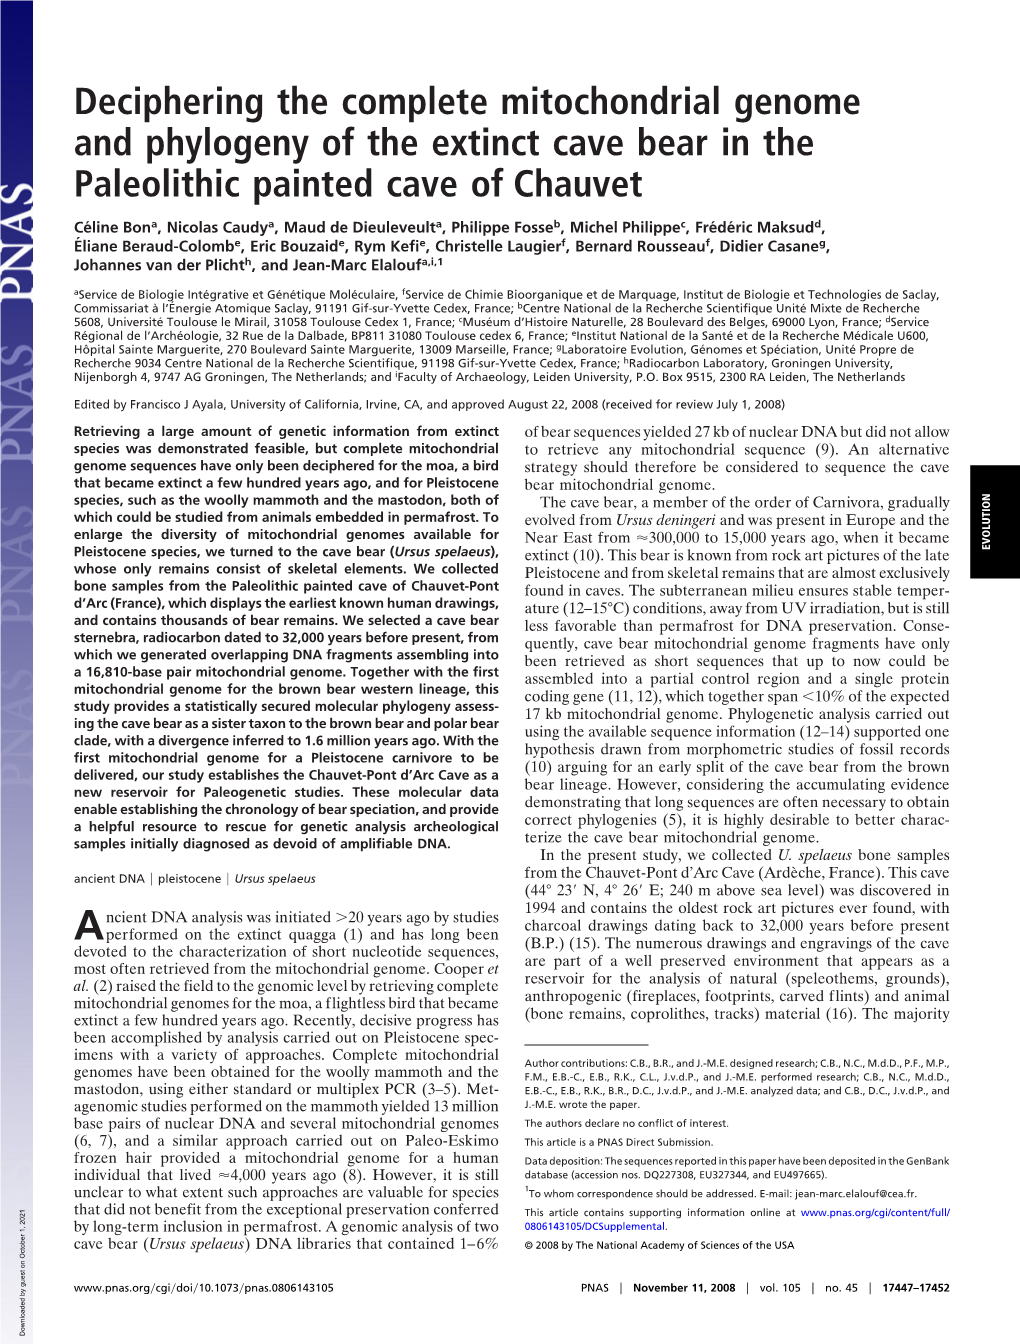 Deciphering the Complete Mitochondrial Genome and Phylogeny of the Extinct Cave Bear in the Paleolithic Painted Cave of Chauvet